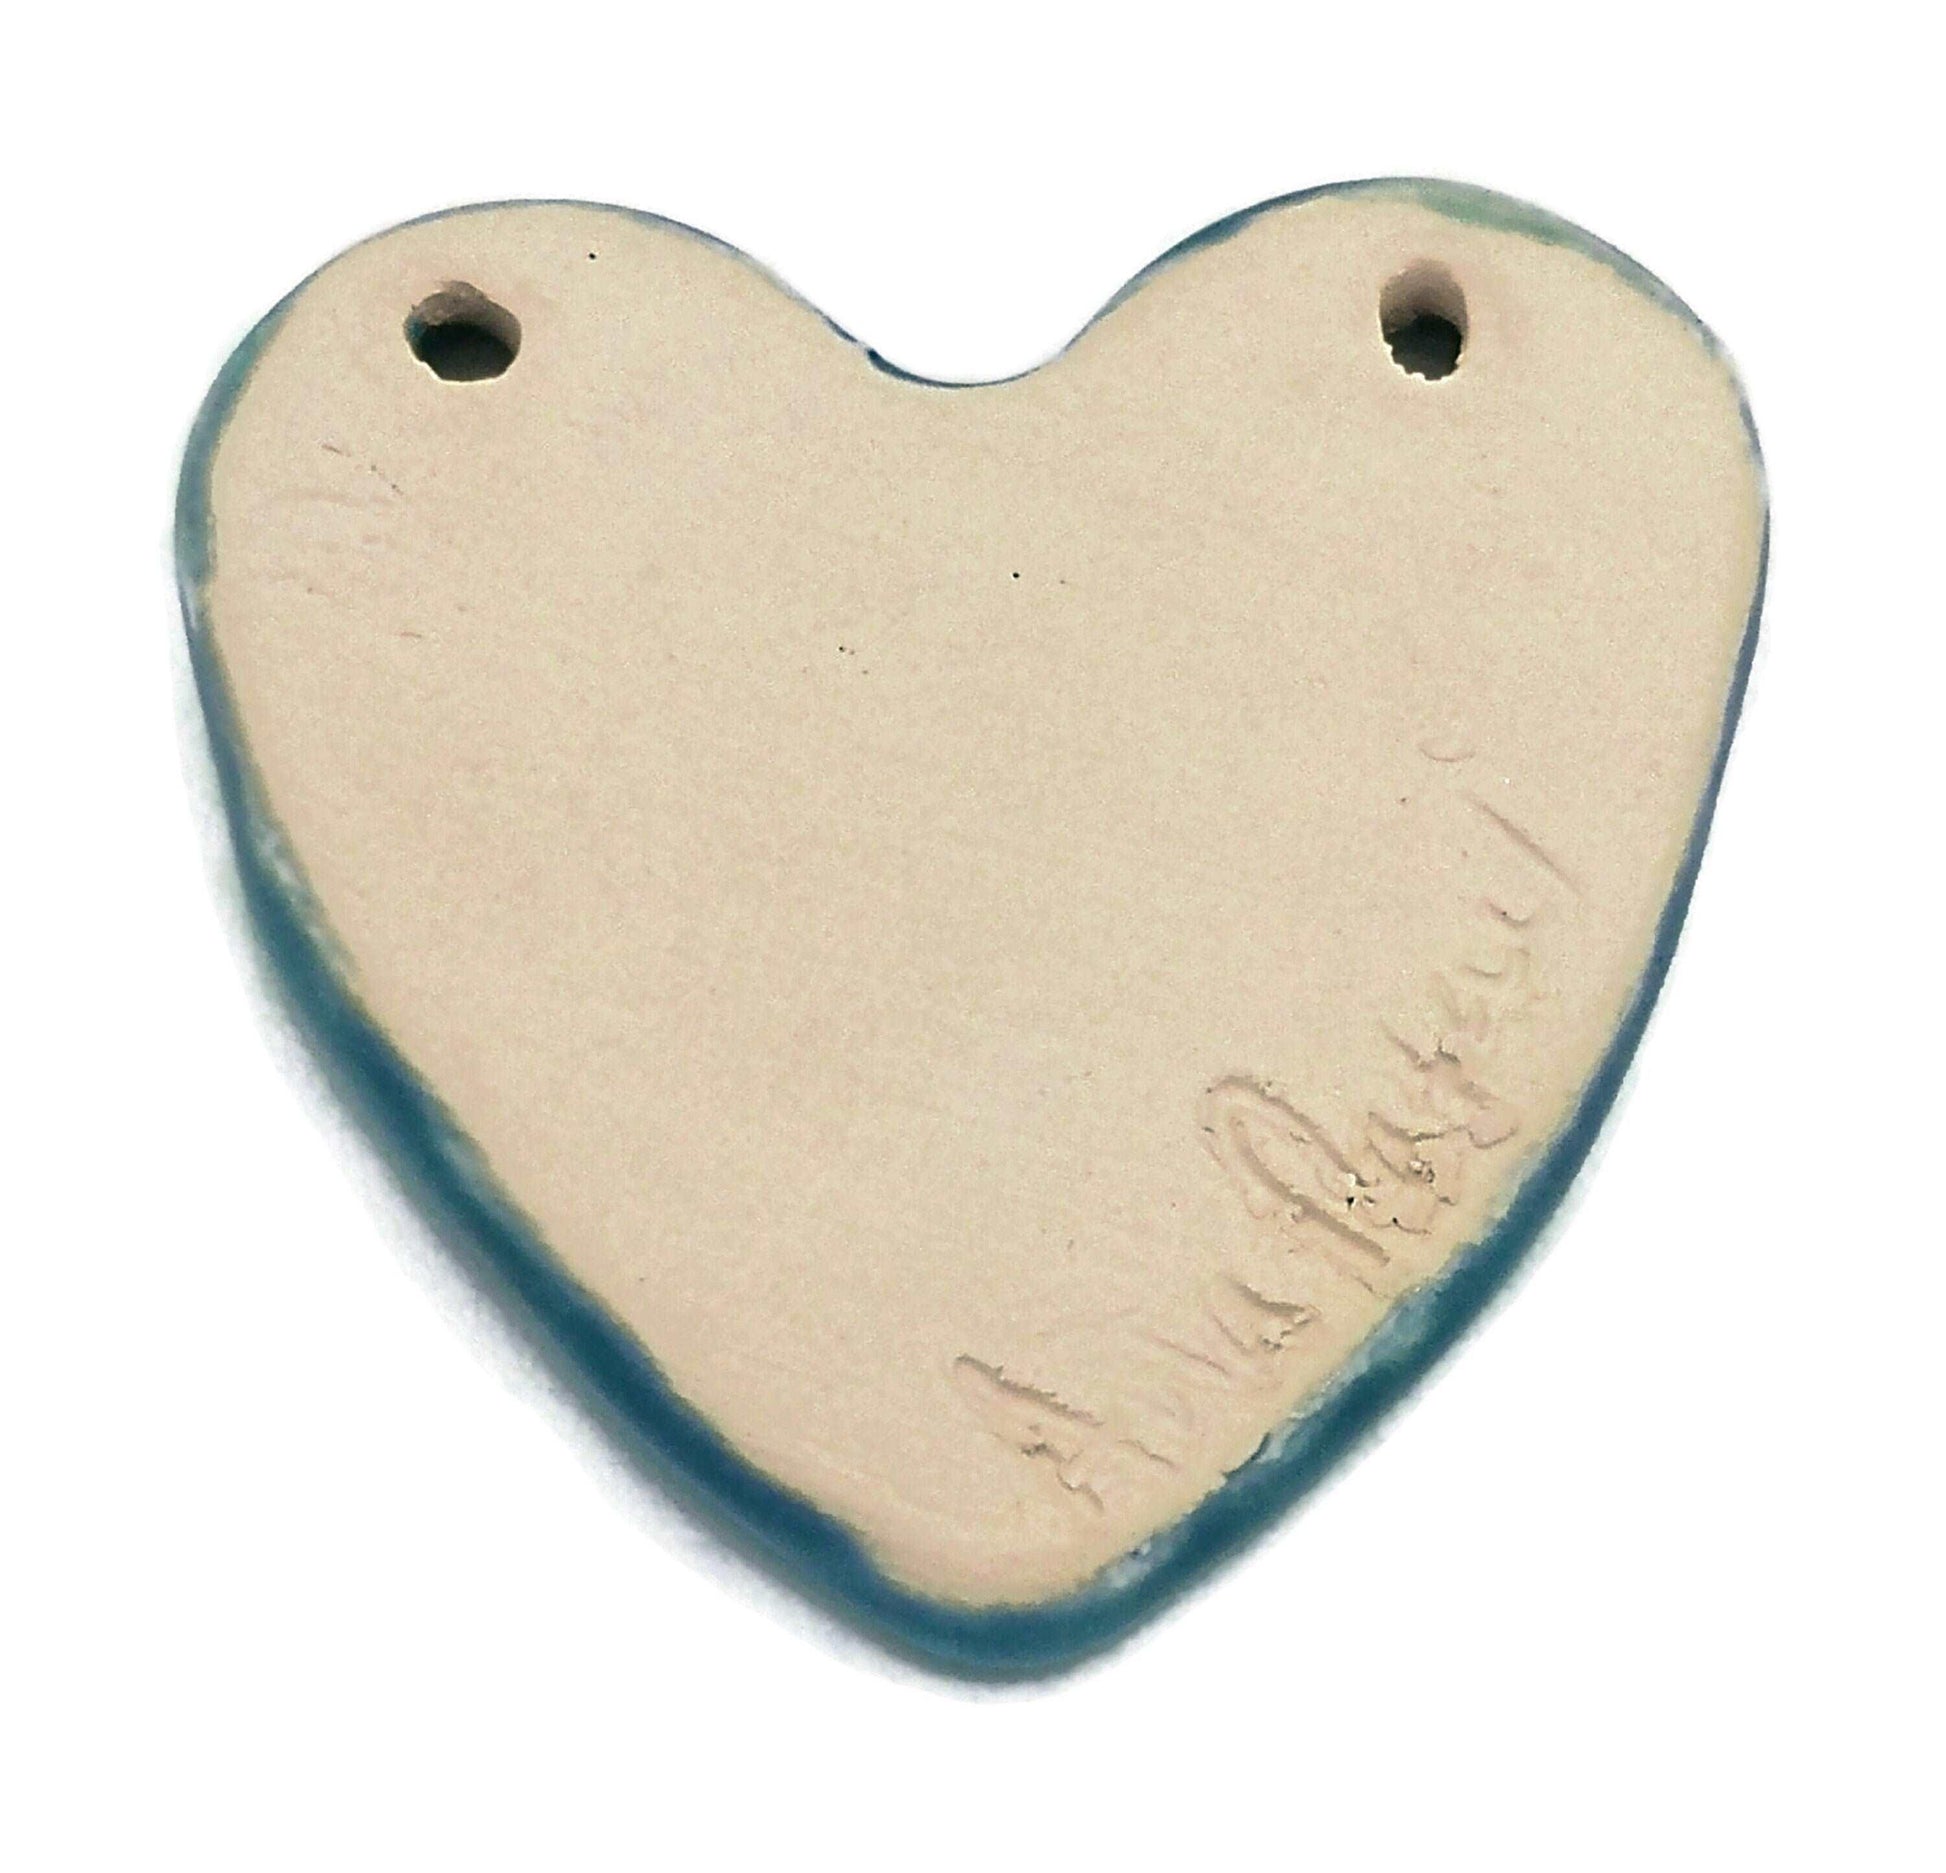 1Pc 55mm Handmade Ceramic Large Blue Heart Pendant For Necklace For Women, Jewelry Making Accessories, 2 Holes Unique Textured Clay Charms